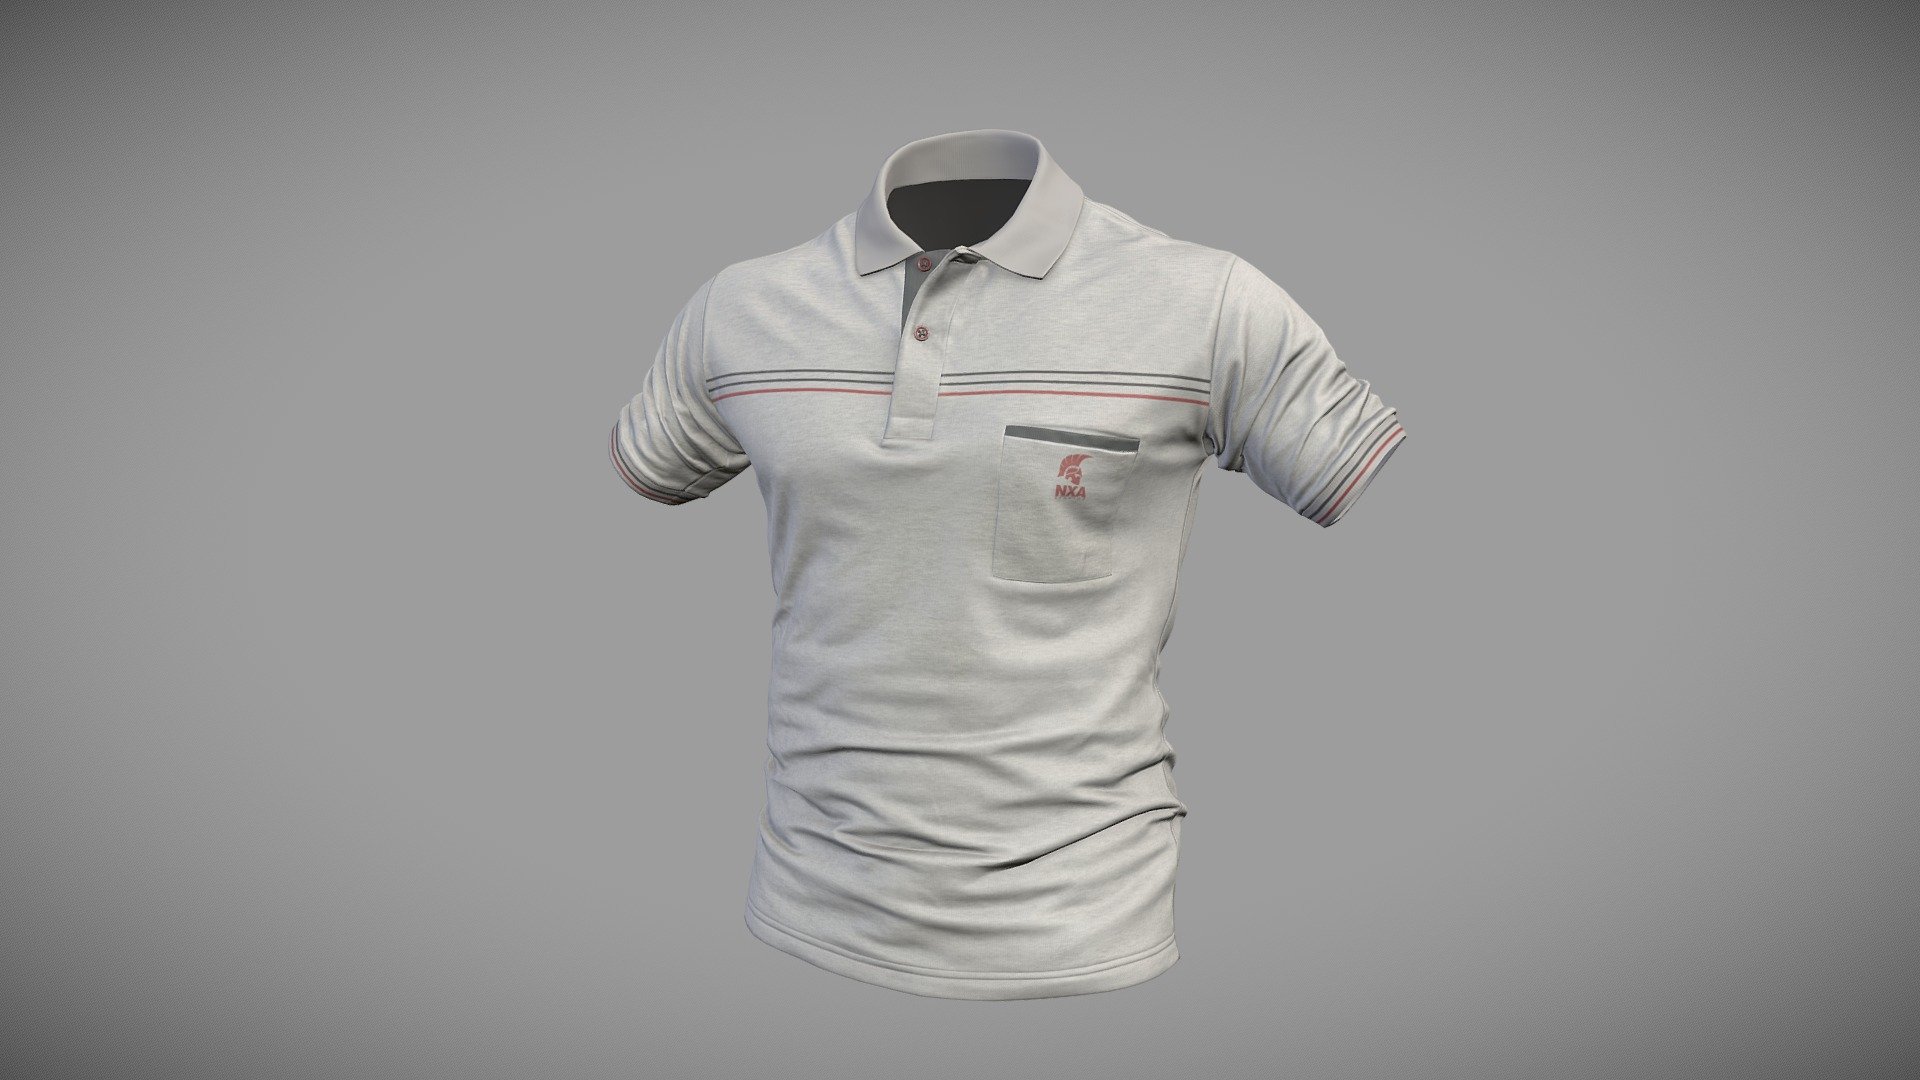 Shirt I made for NXA Studios Argentina's Shirt Challenge, based on a scan provided by them 3d model